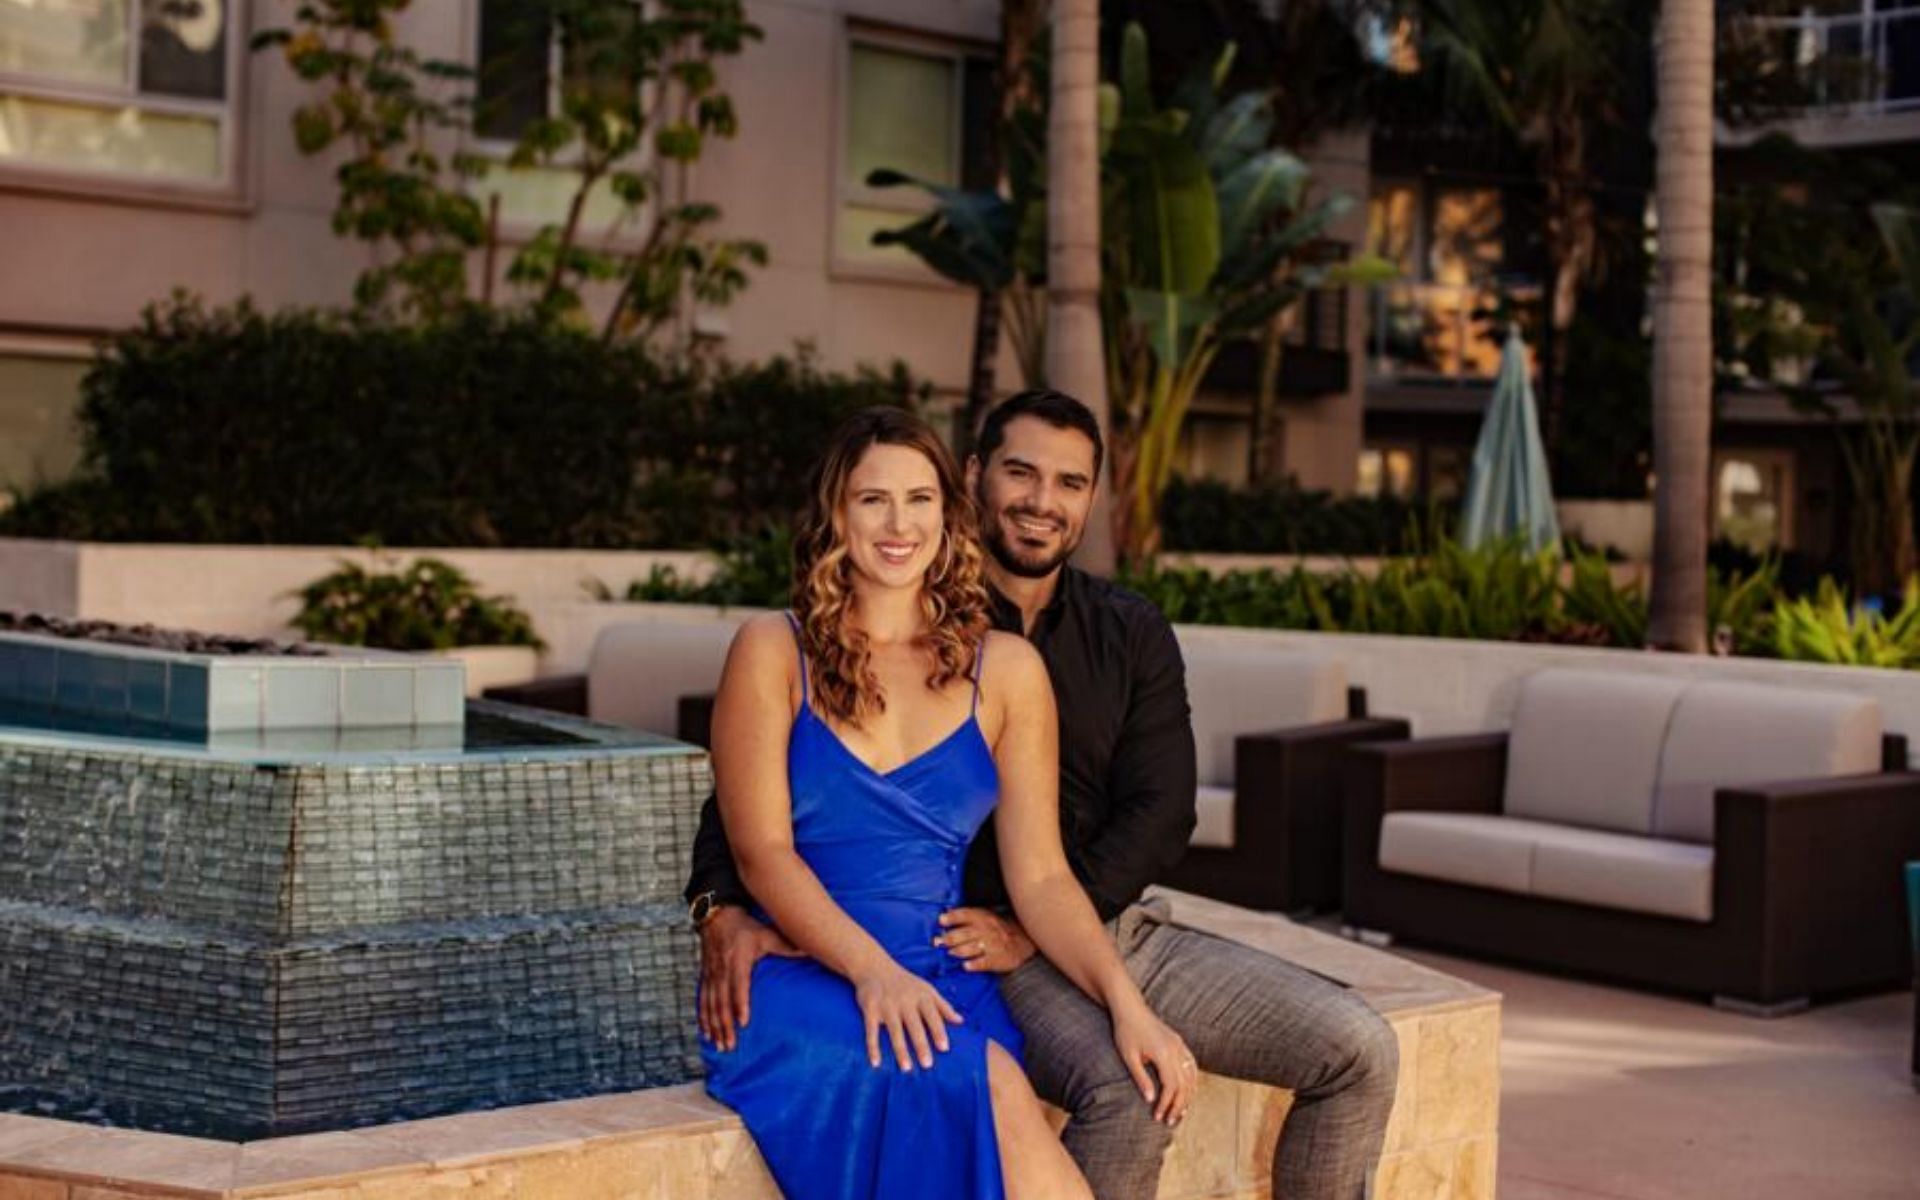 Married at First Sight fans believe Miguel is weird and that his marriage to Lindy will be unstable (Image via Lifetime)